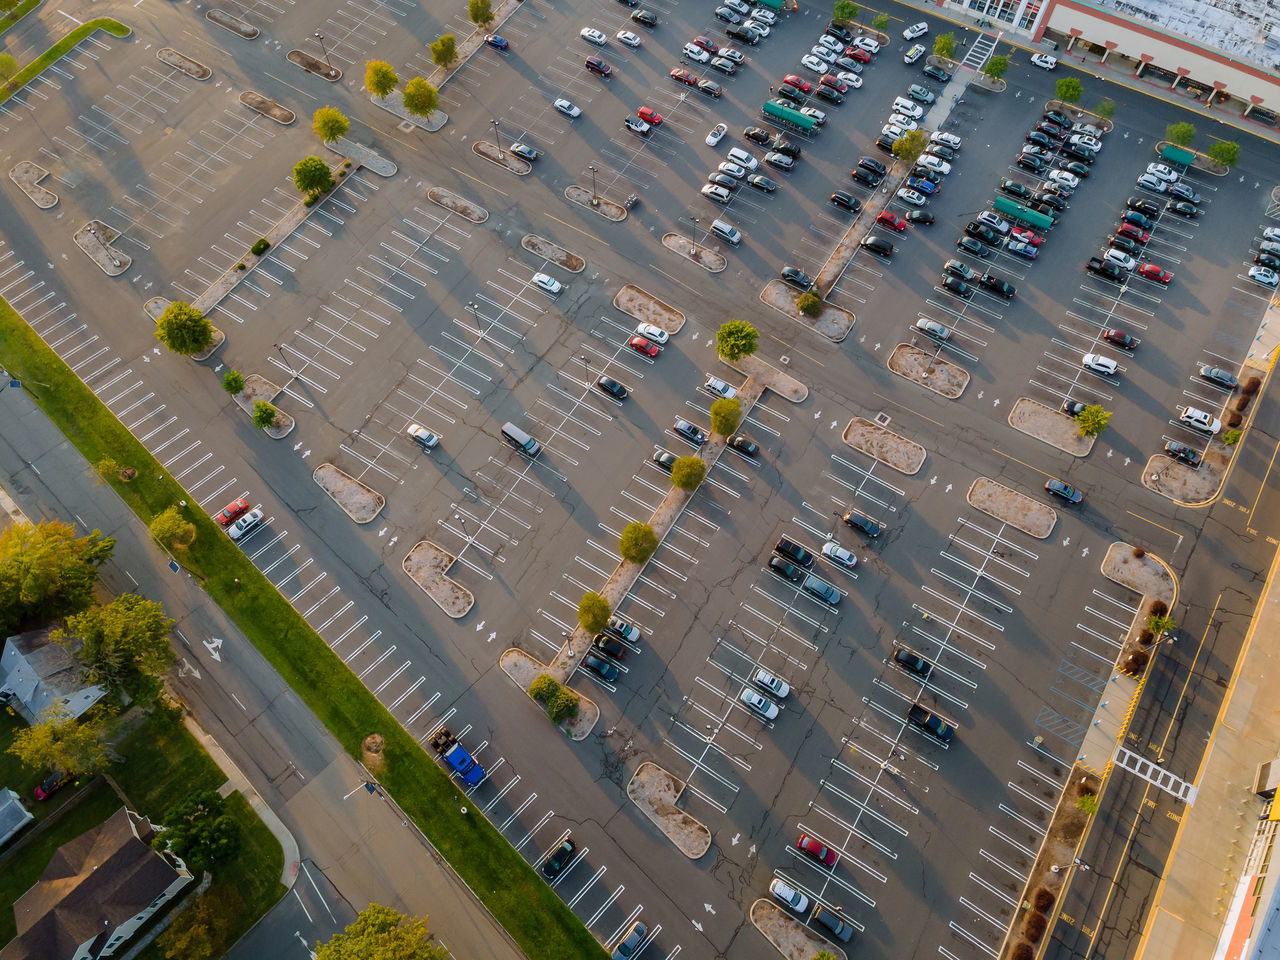 HIGH ANGLE VIEW OF VEHICLES ON ROAD